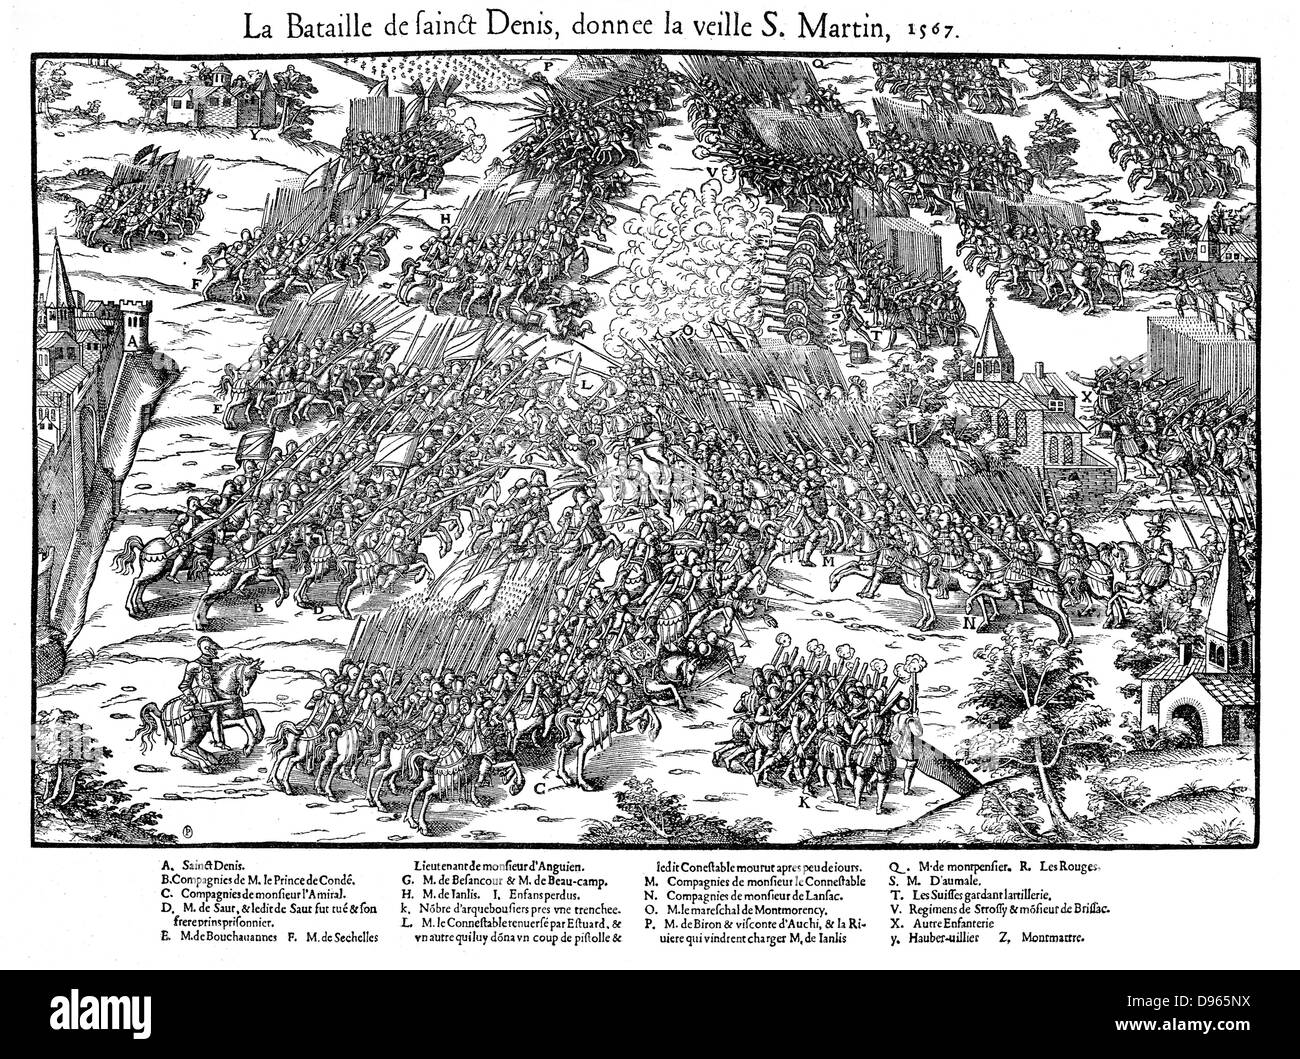 French Religious Wars 1562-1598 Battle of St Denis, 10 November 1567, between Huguenots under Louis, Prince de Conde (1530-1569) and the royal army under Anne de Montmorency (1493-1567) who was mortally wounded in the battle. Huguenots defeated.  Engraving by Jacques Tortorel (fl1568-1590) and Jean-Jacques Perrissin (c1536-1617) from their series on the Huguenot Wars, c1570. Stock Photo